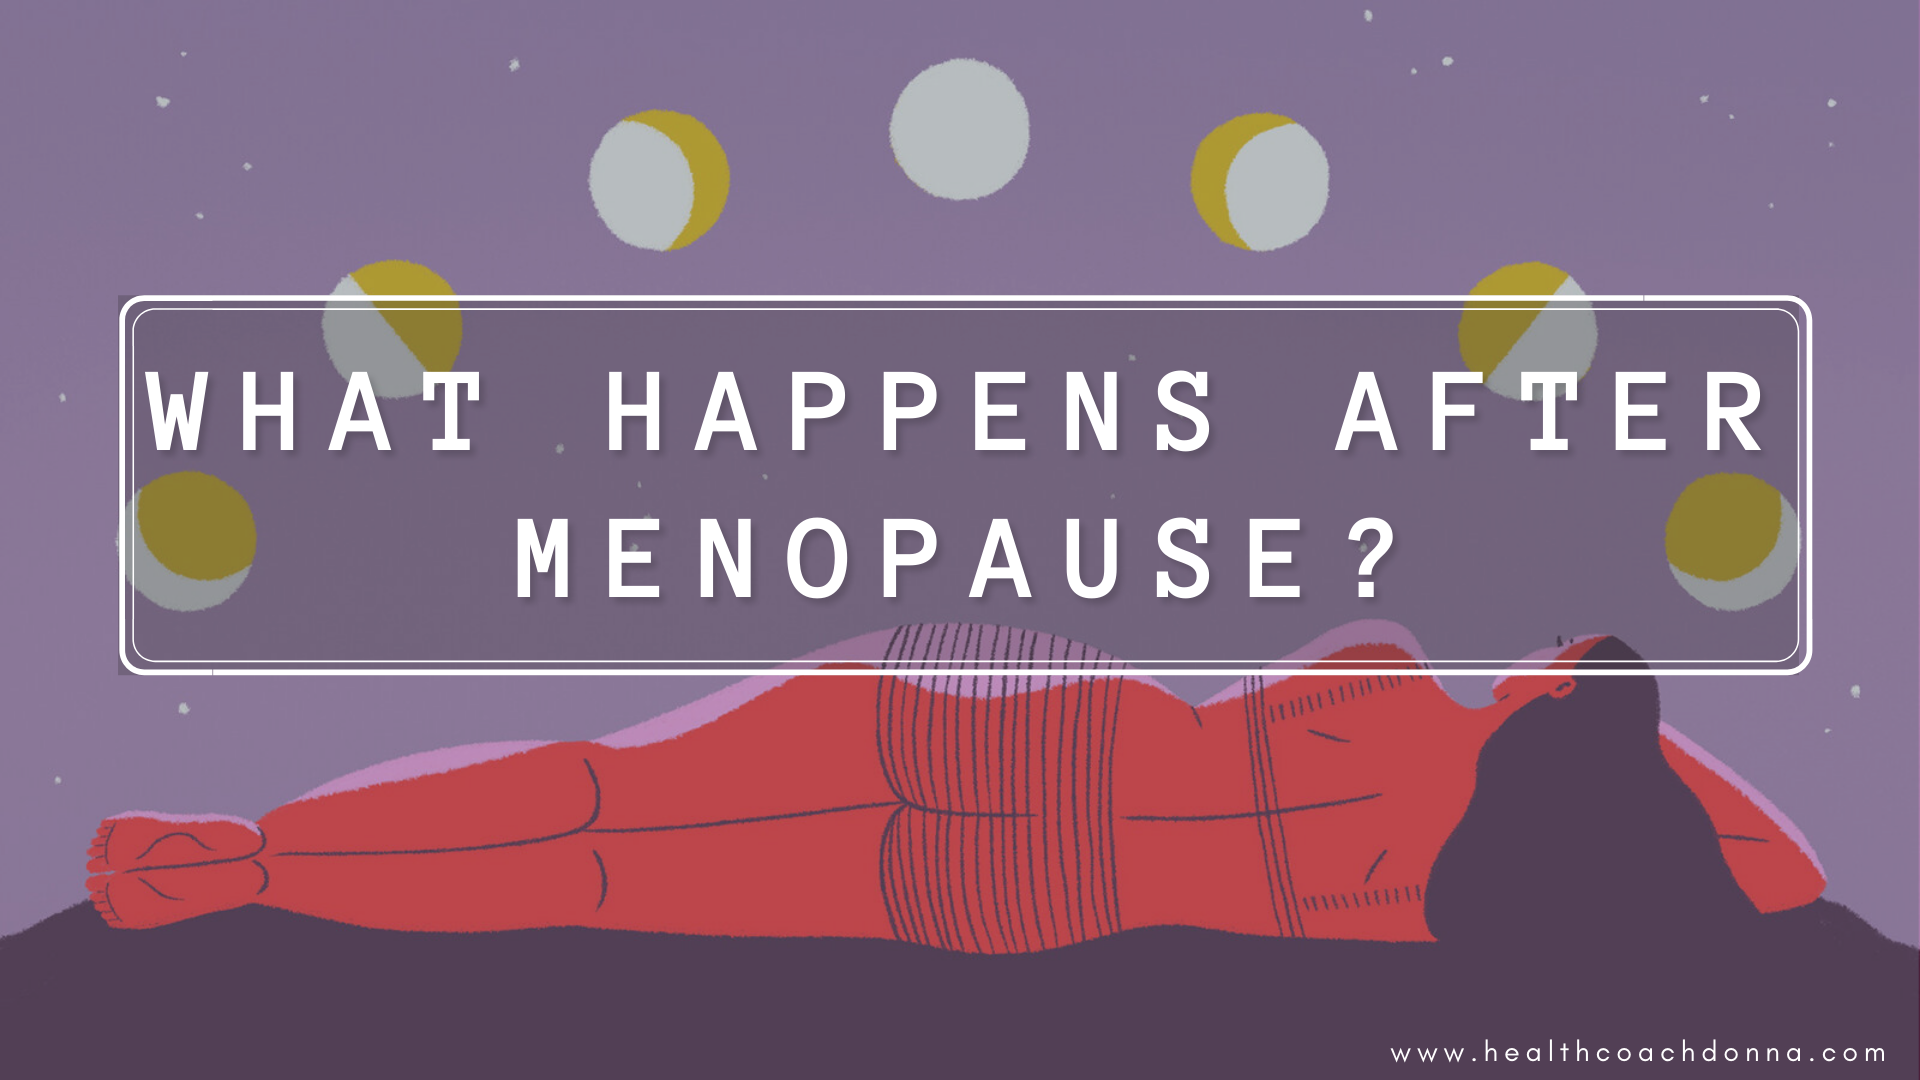 What Happens After Menopause?